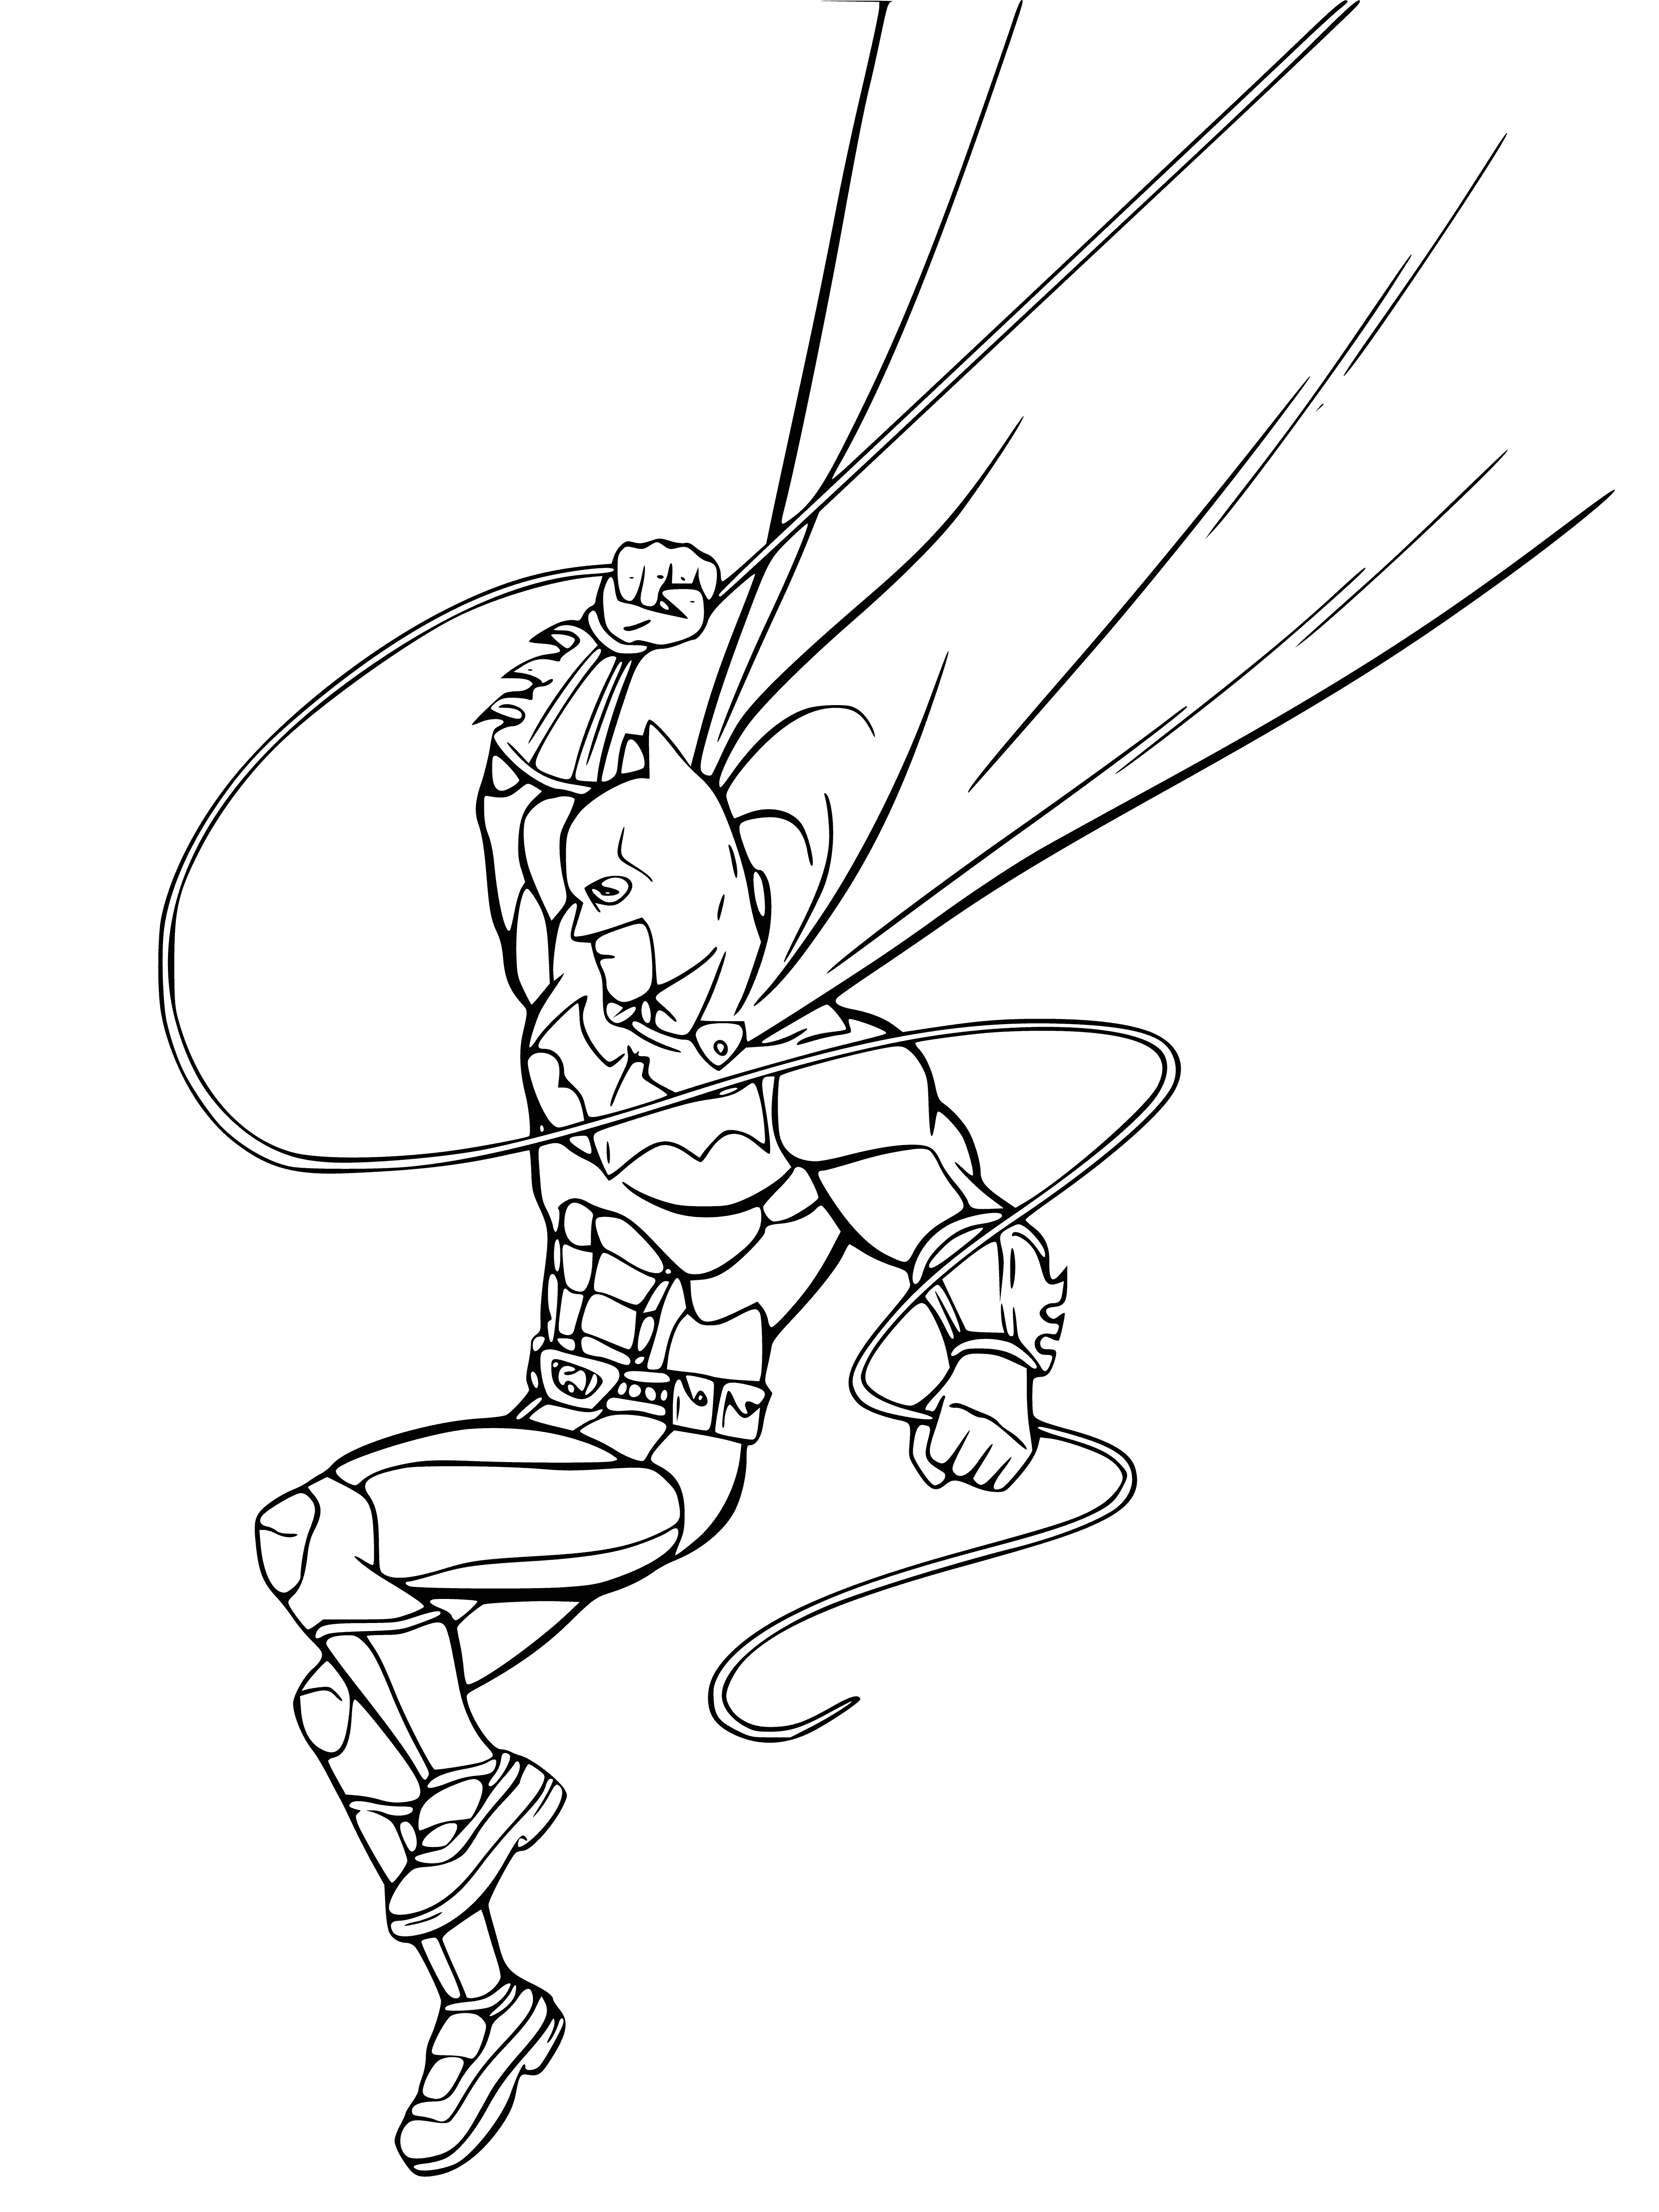 coloring page: Batman stands ready to protect Gotham City. Wearing his black cape and cowl and lit by the full moon, he is a force to be reckoned with. #Batman